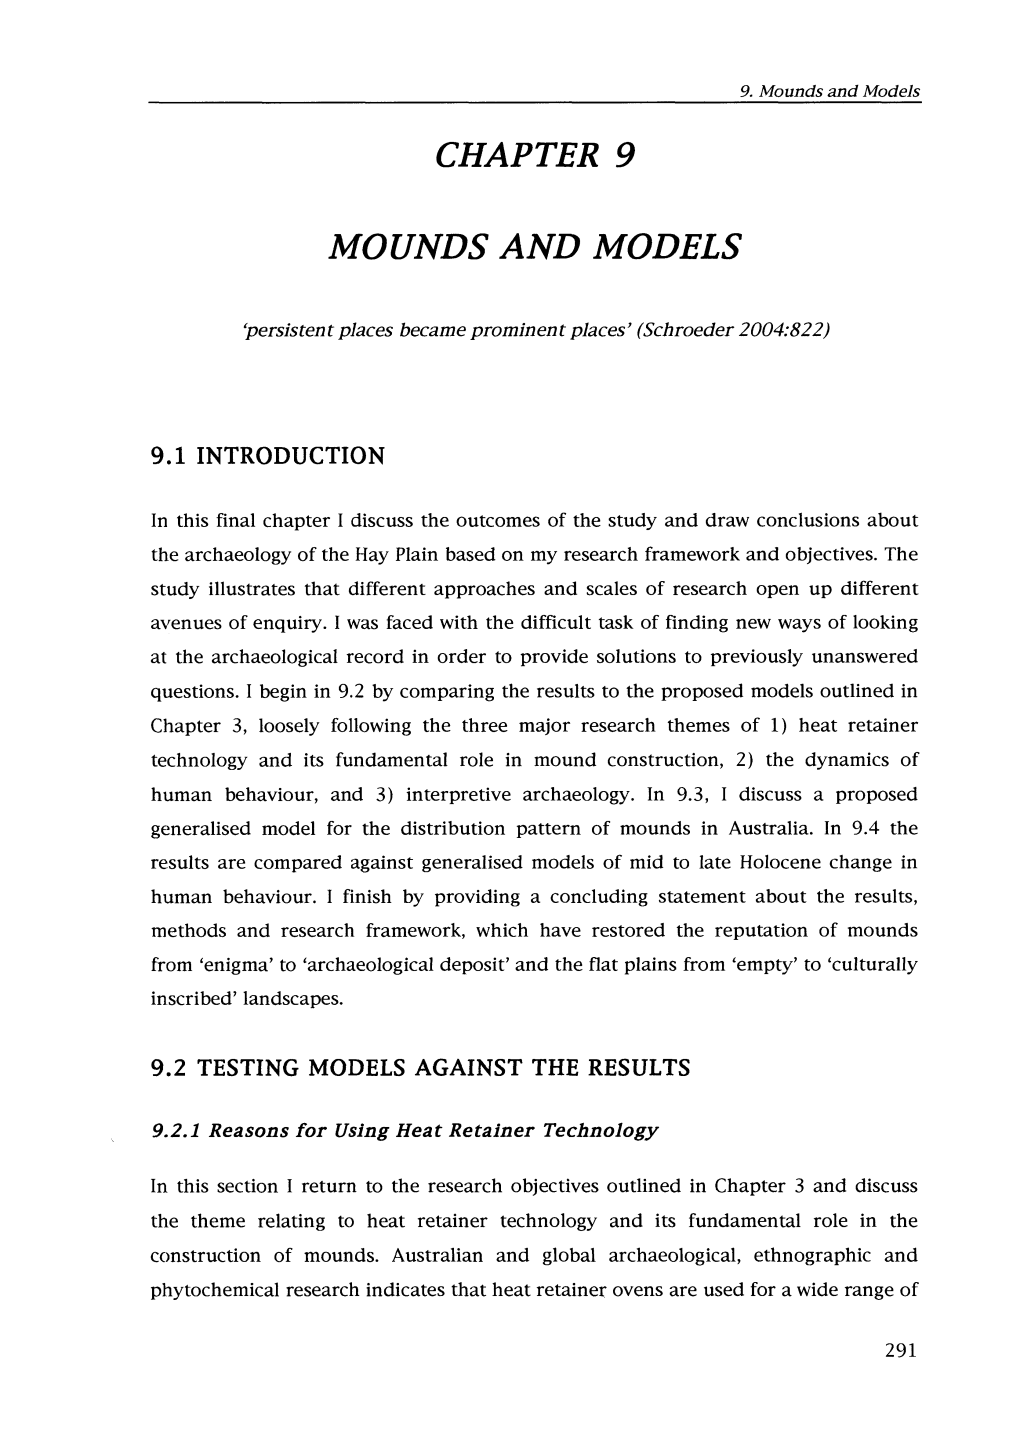 Chapter 9 Mounds and Models